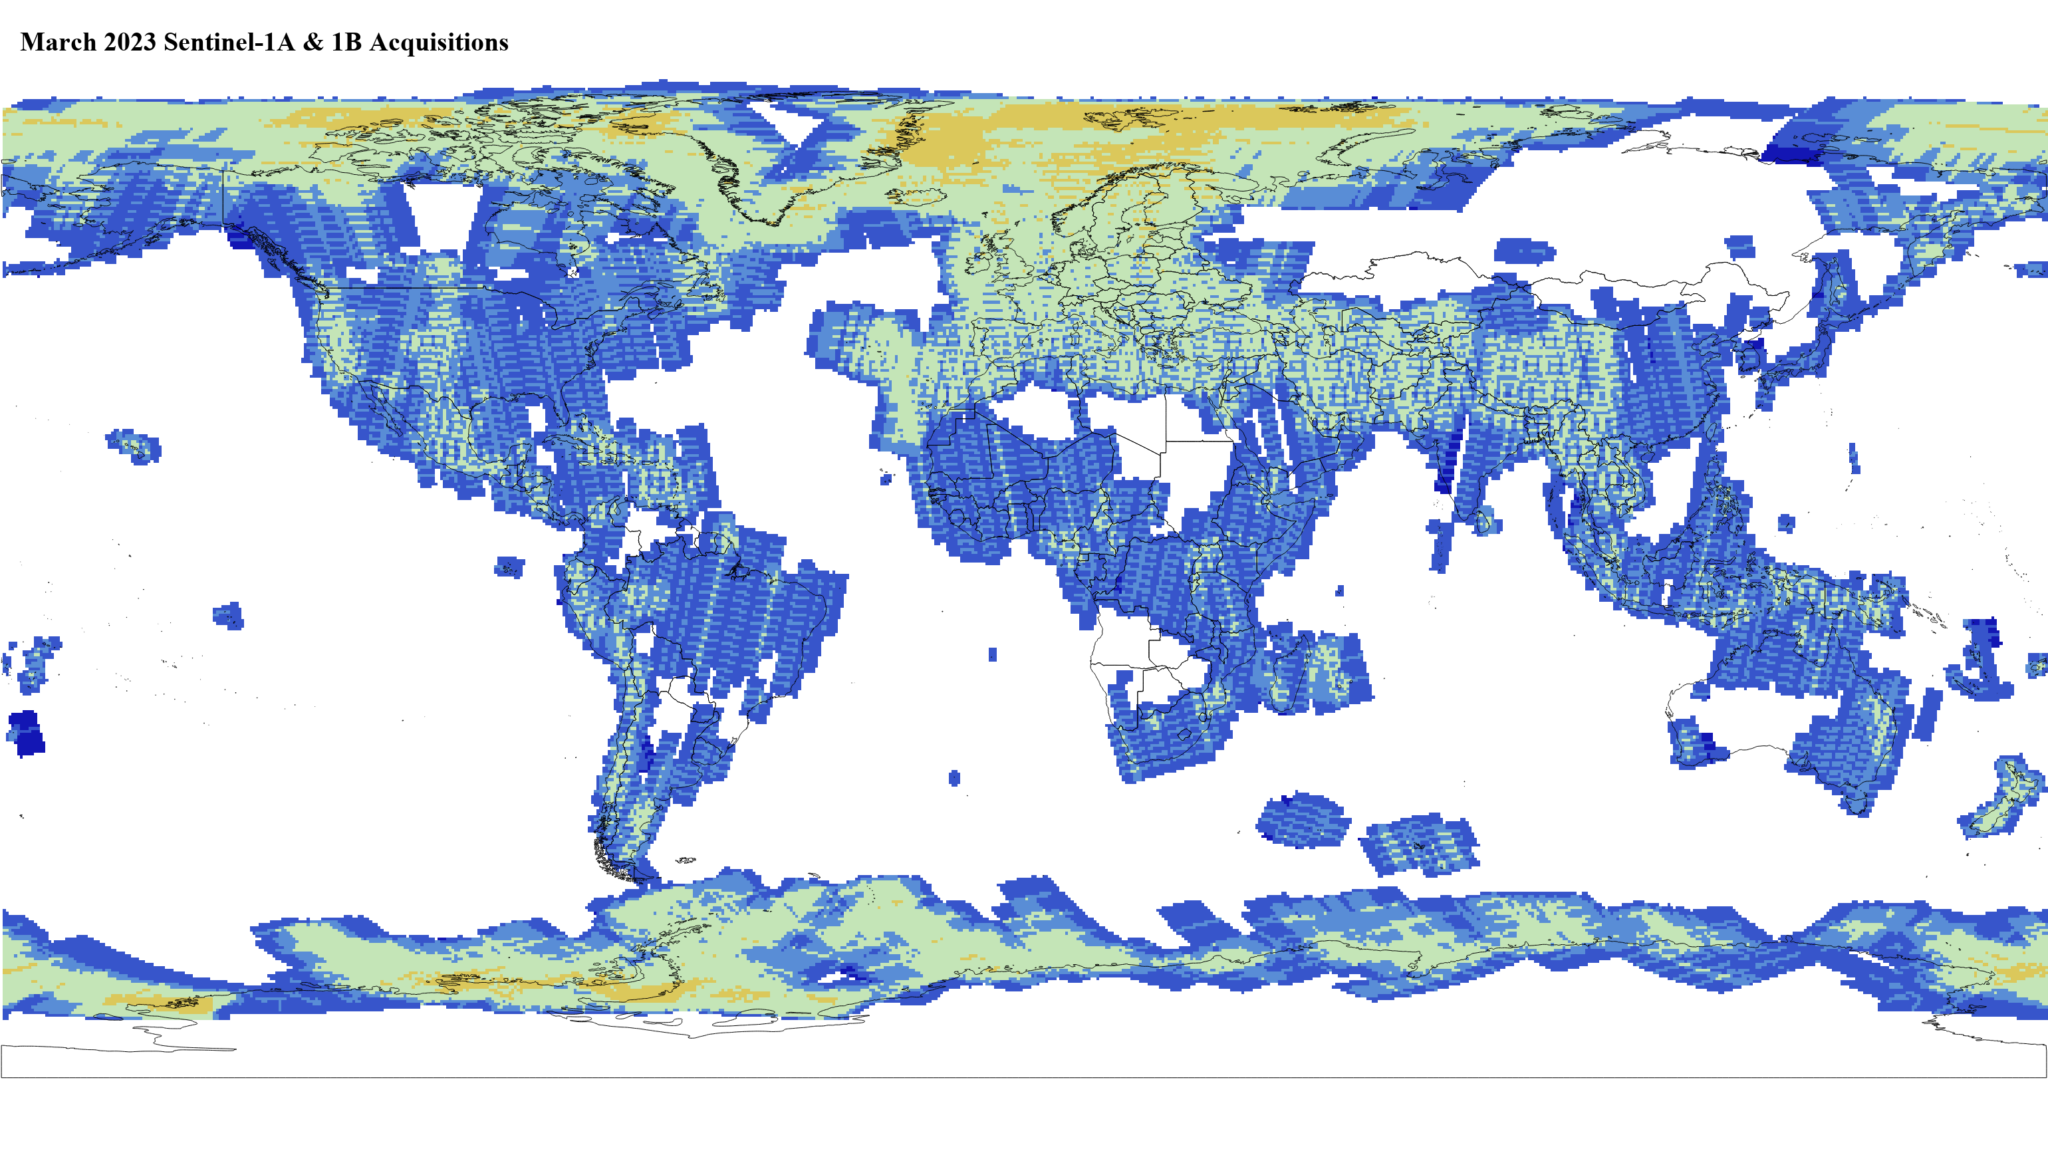 Heat map of Sentinel-1A and -1B GRD global acquisitions March 2023